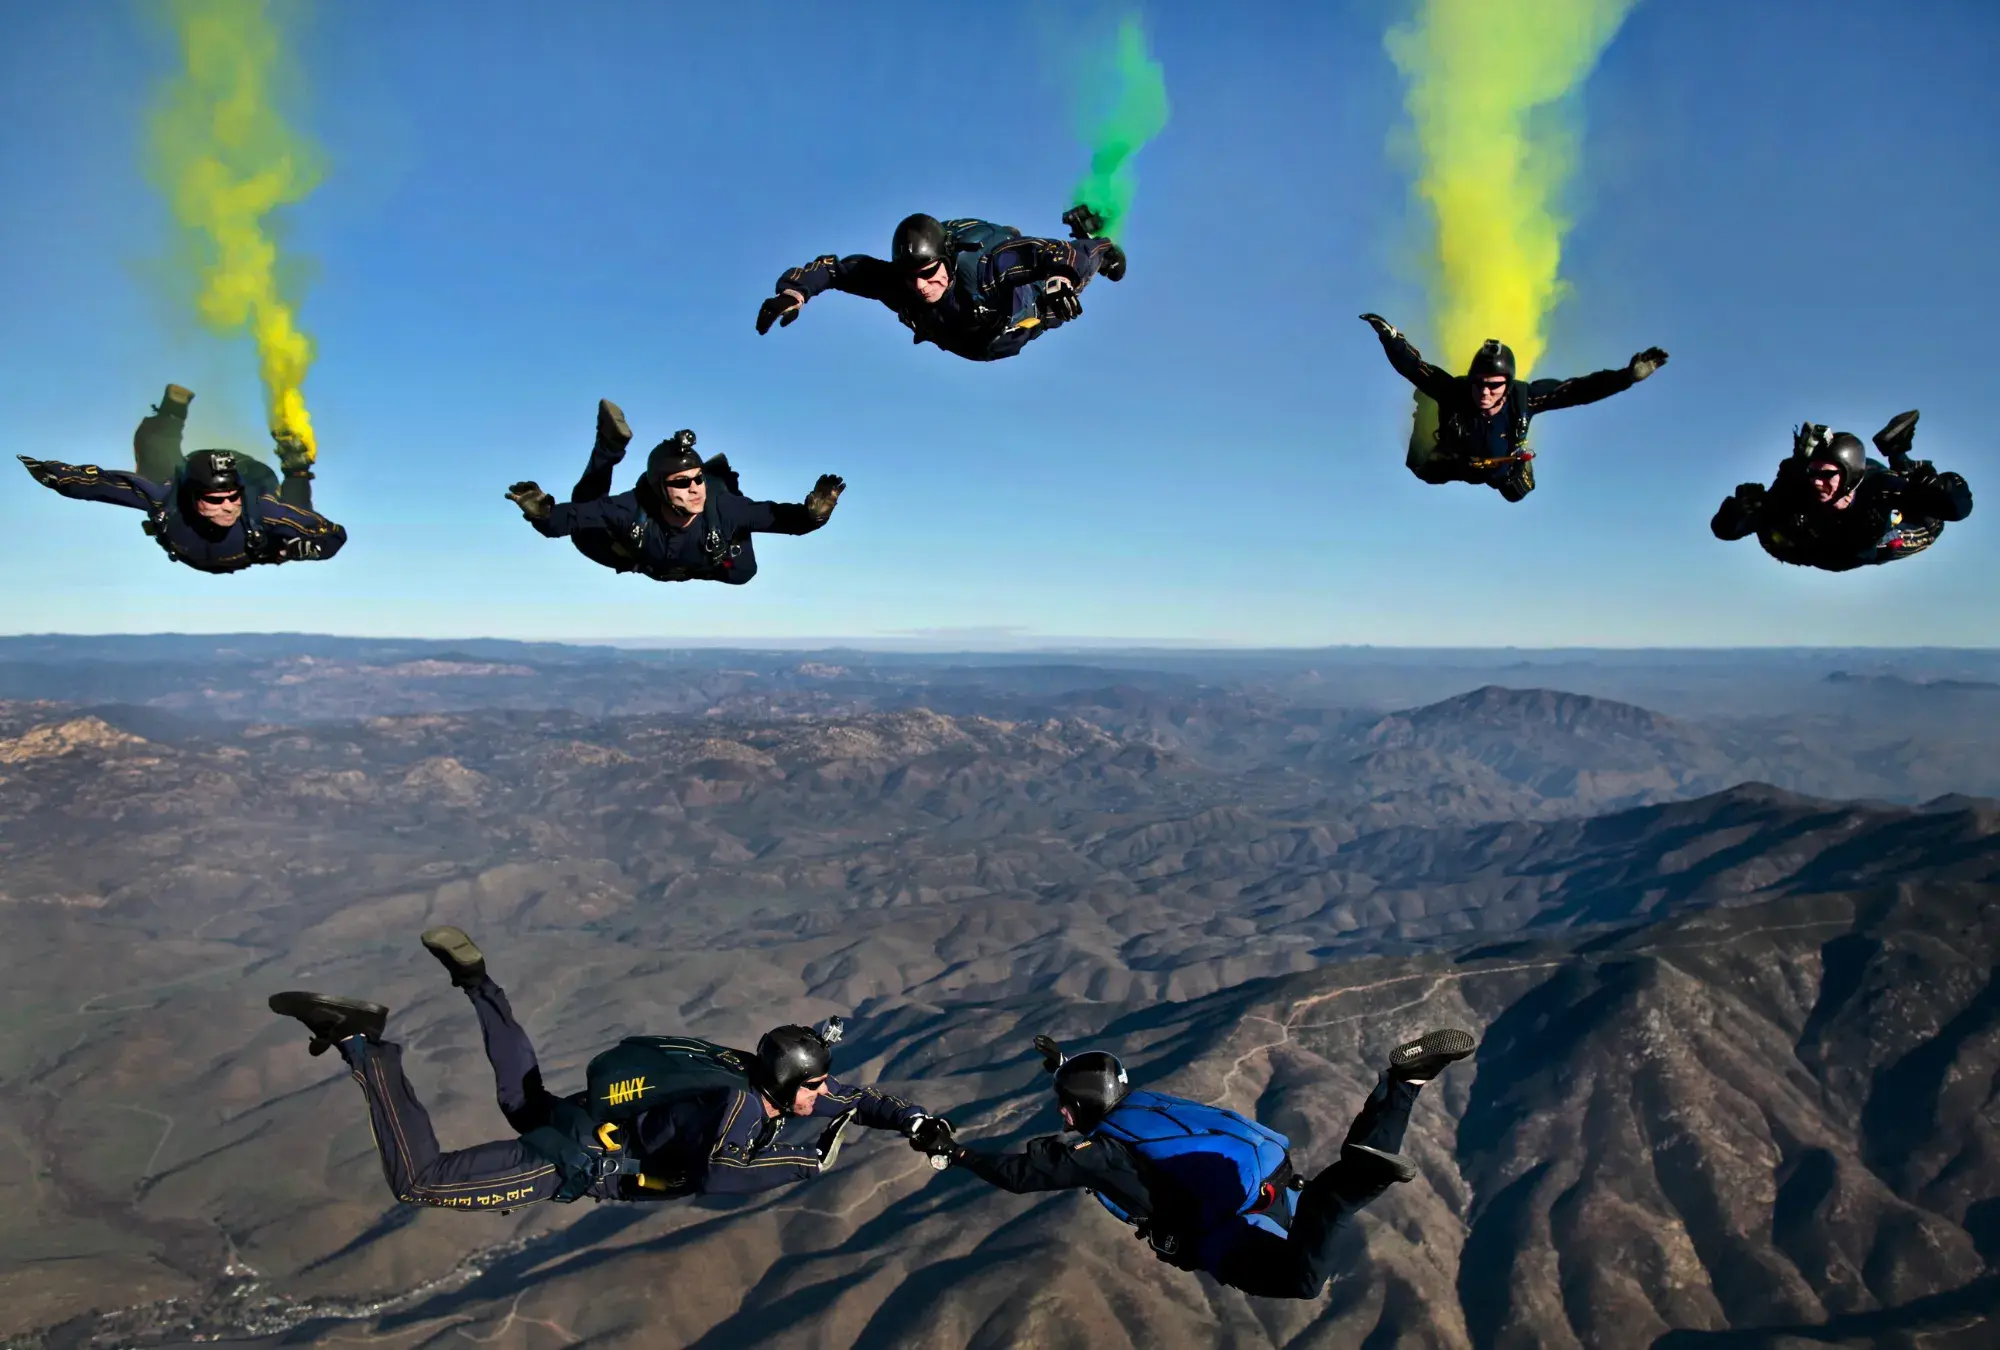 skydiving:-for-the-daring-looking-for-fun-activities-in-dubai-for-adults-1706167272